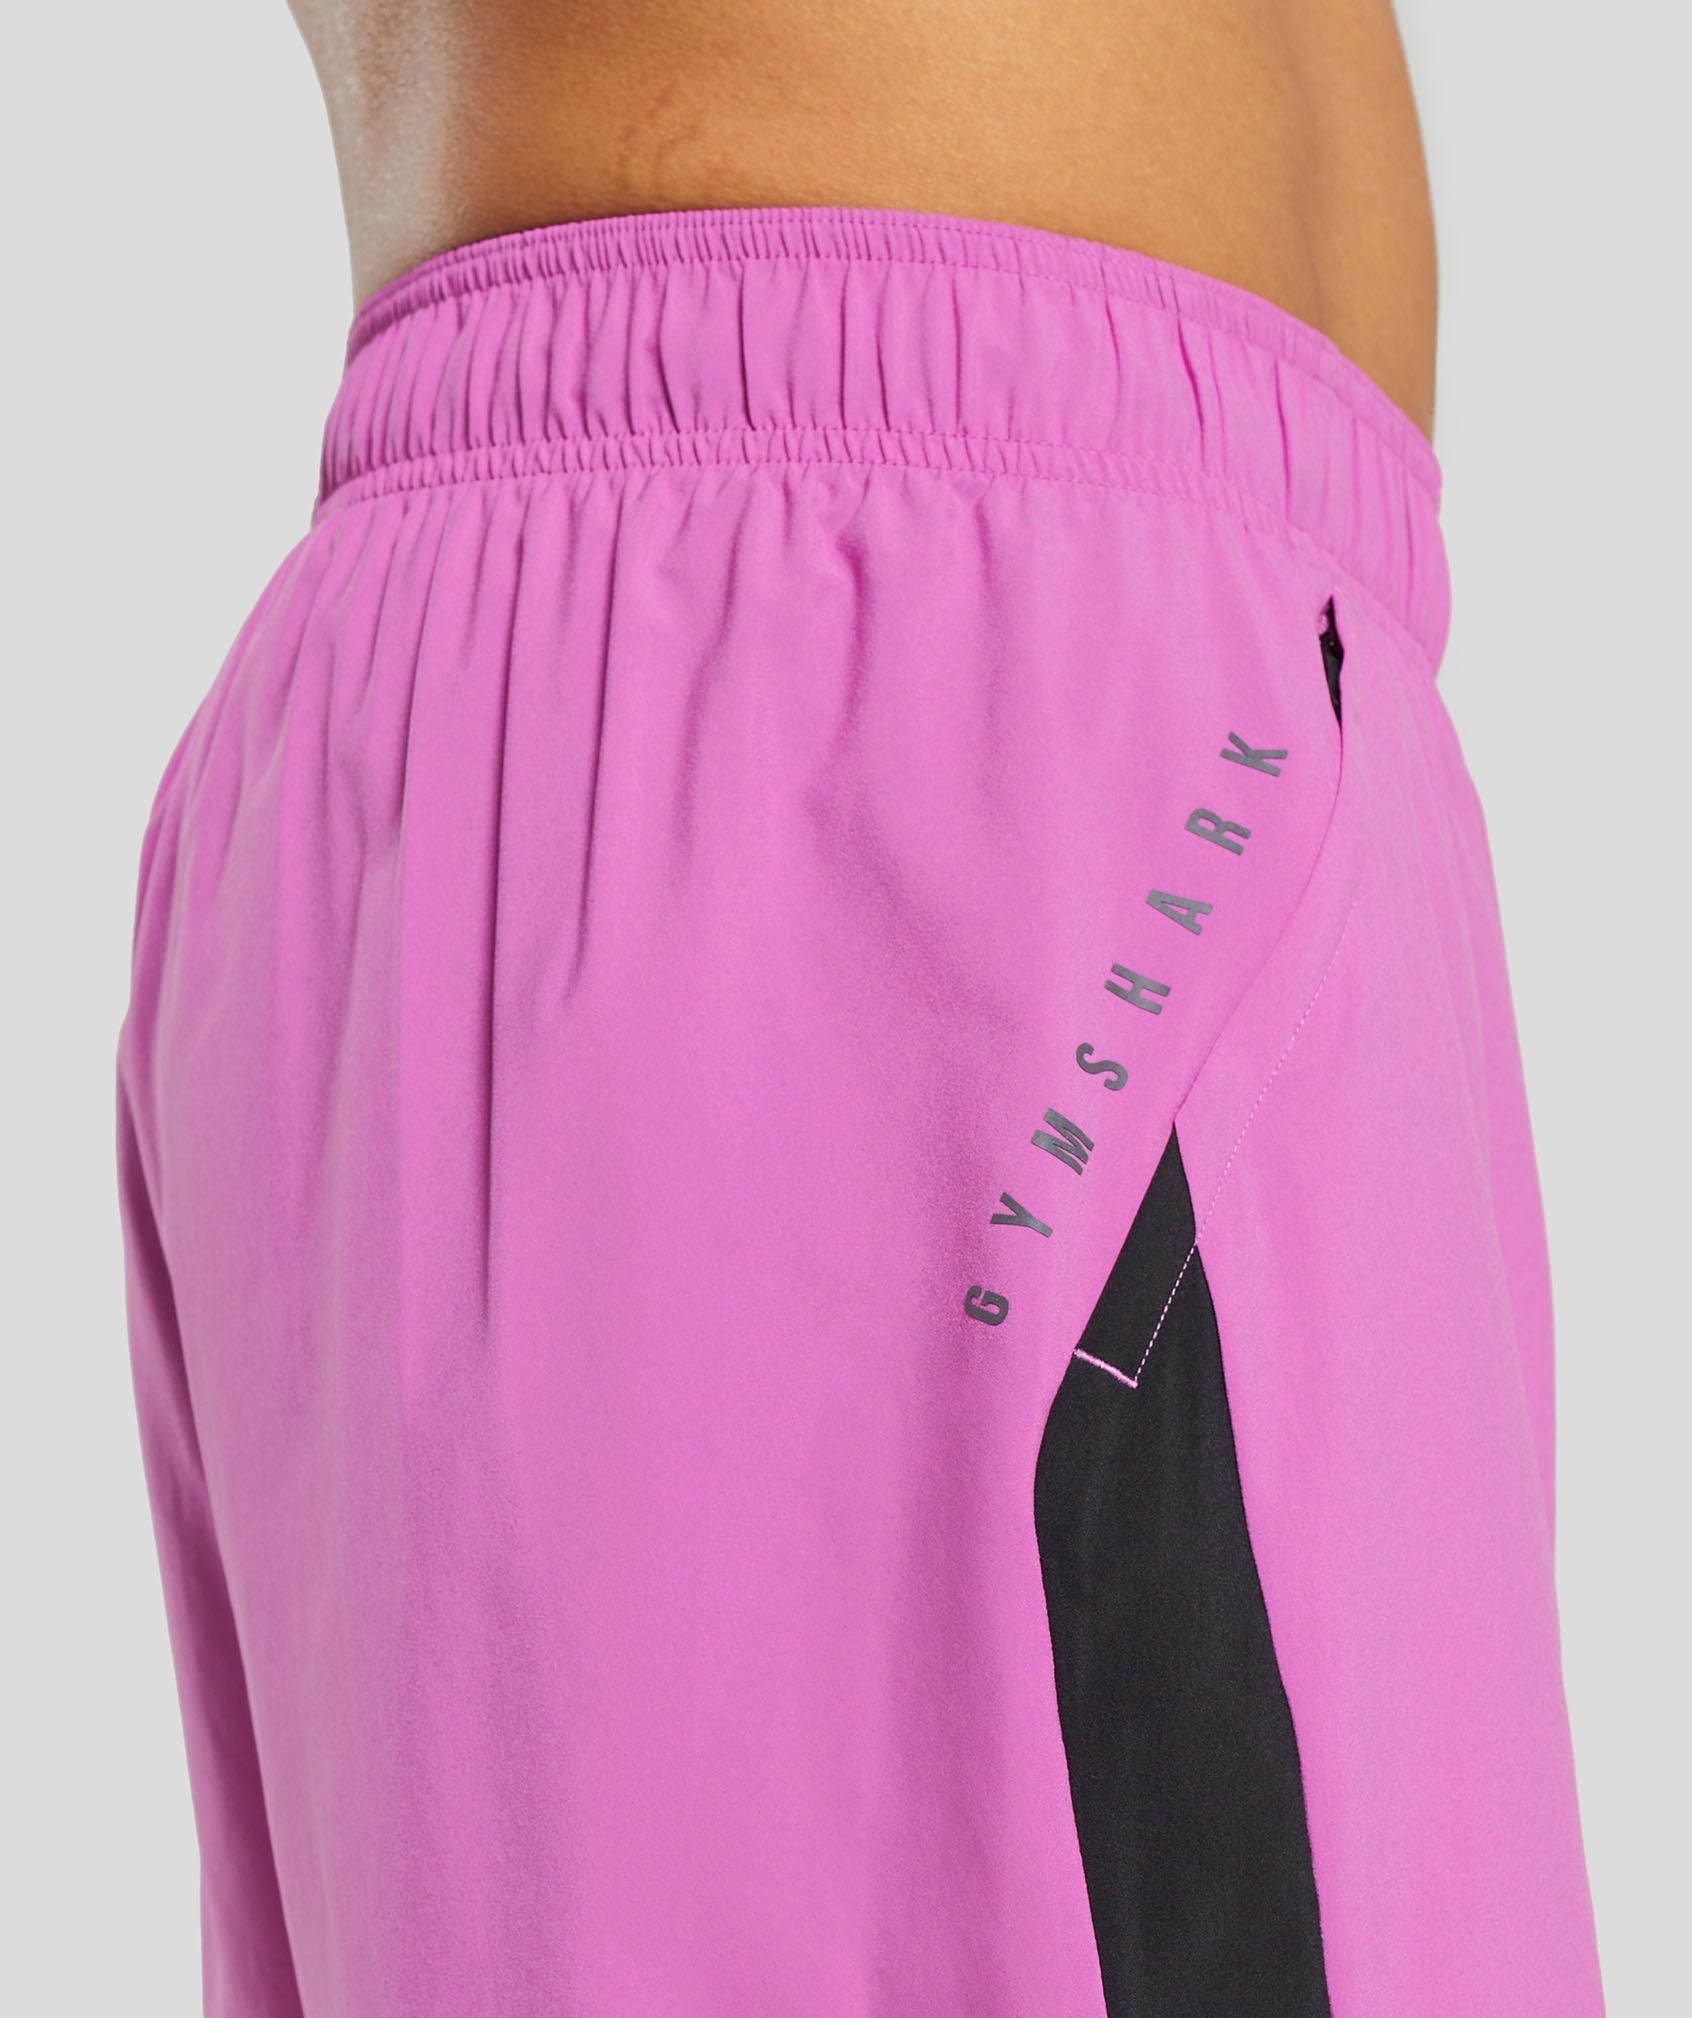 Sport  7" Short in Shelly Pink/Black - view 6